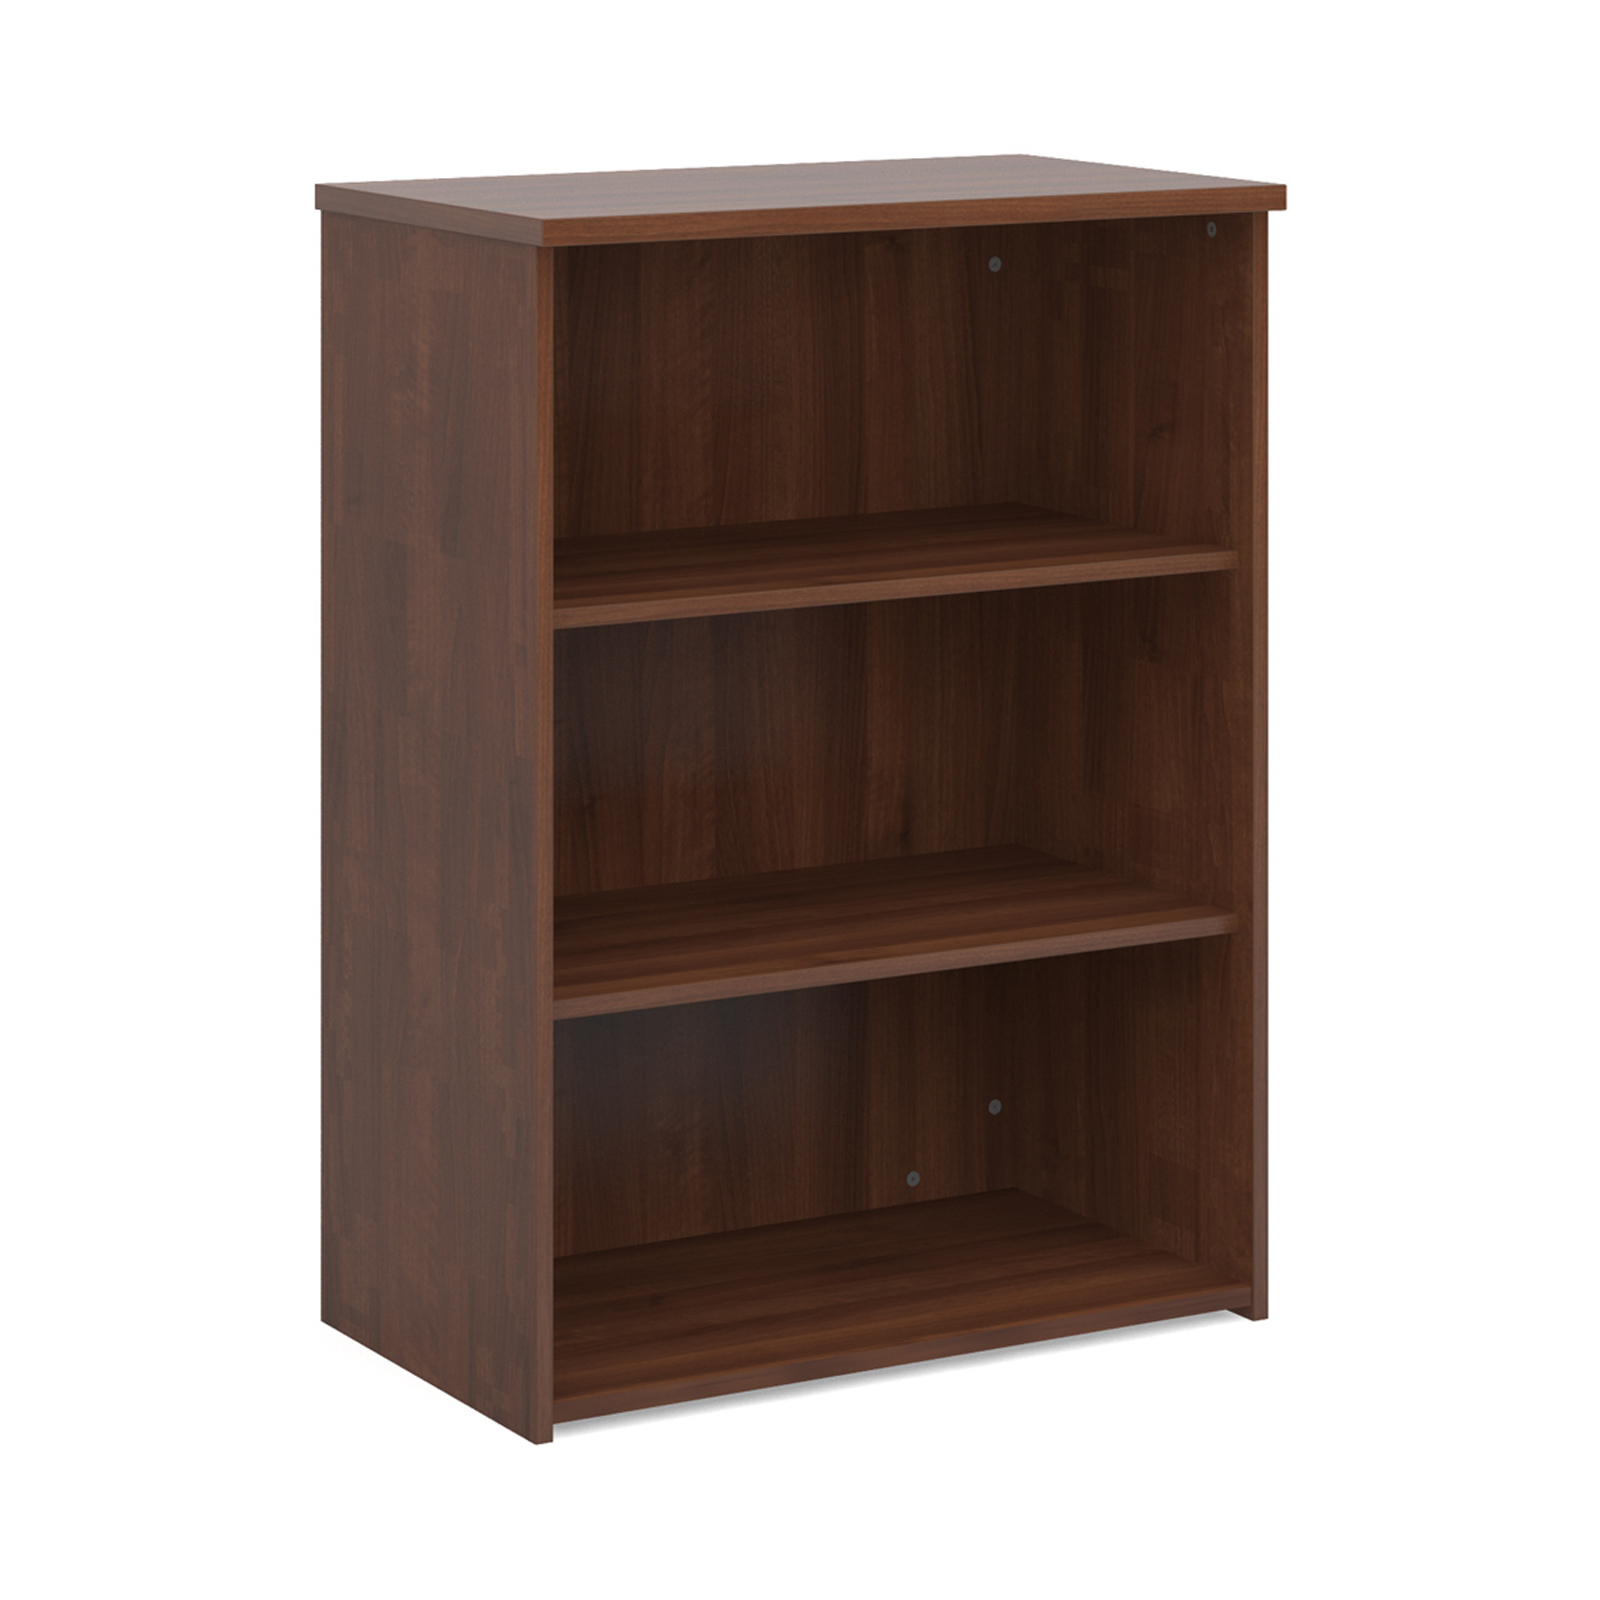 Up To 1200mm High Universal bookcase 1090mm high with 2 shelves - walnut